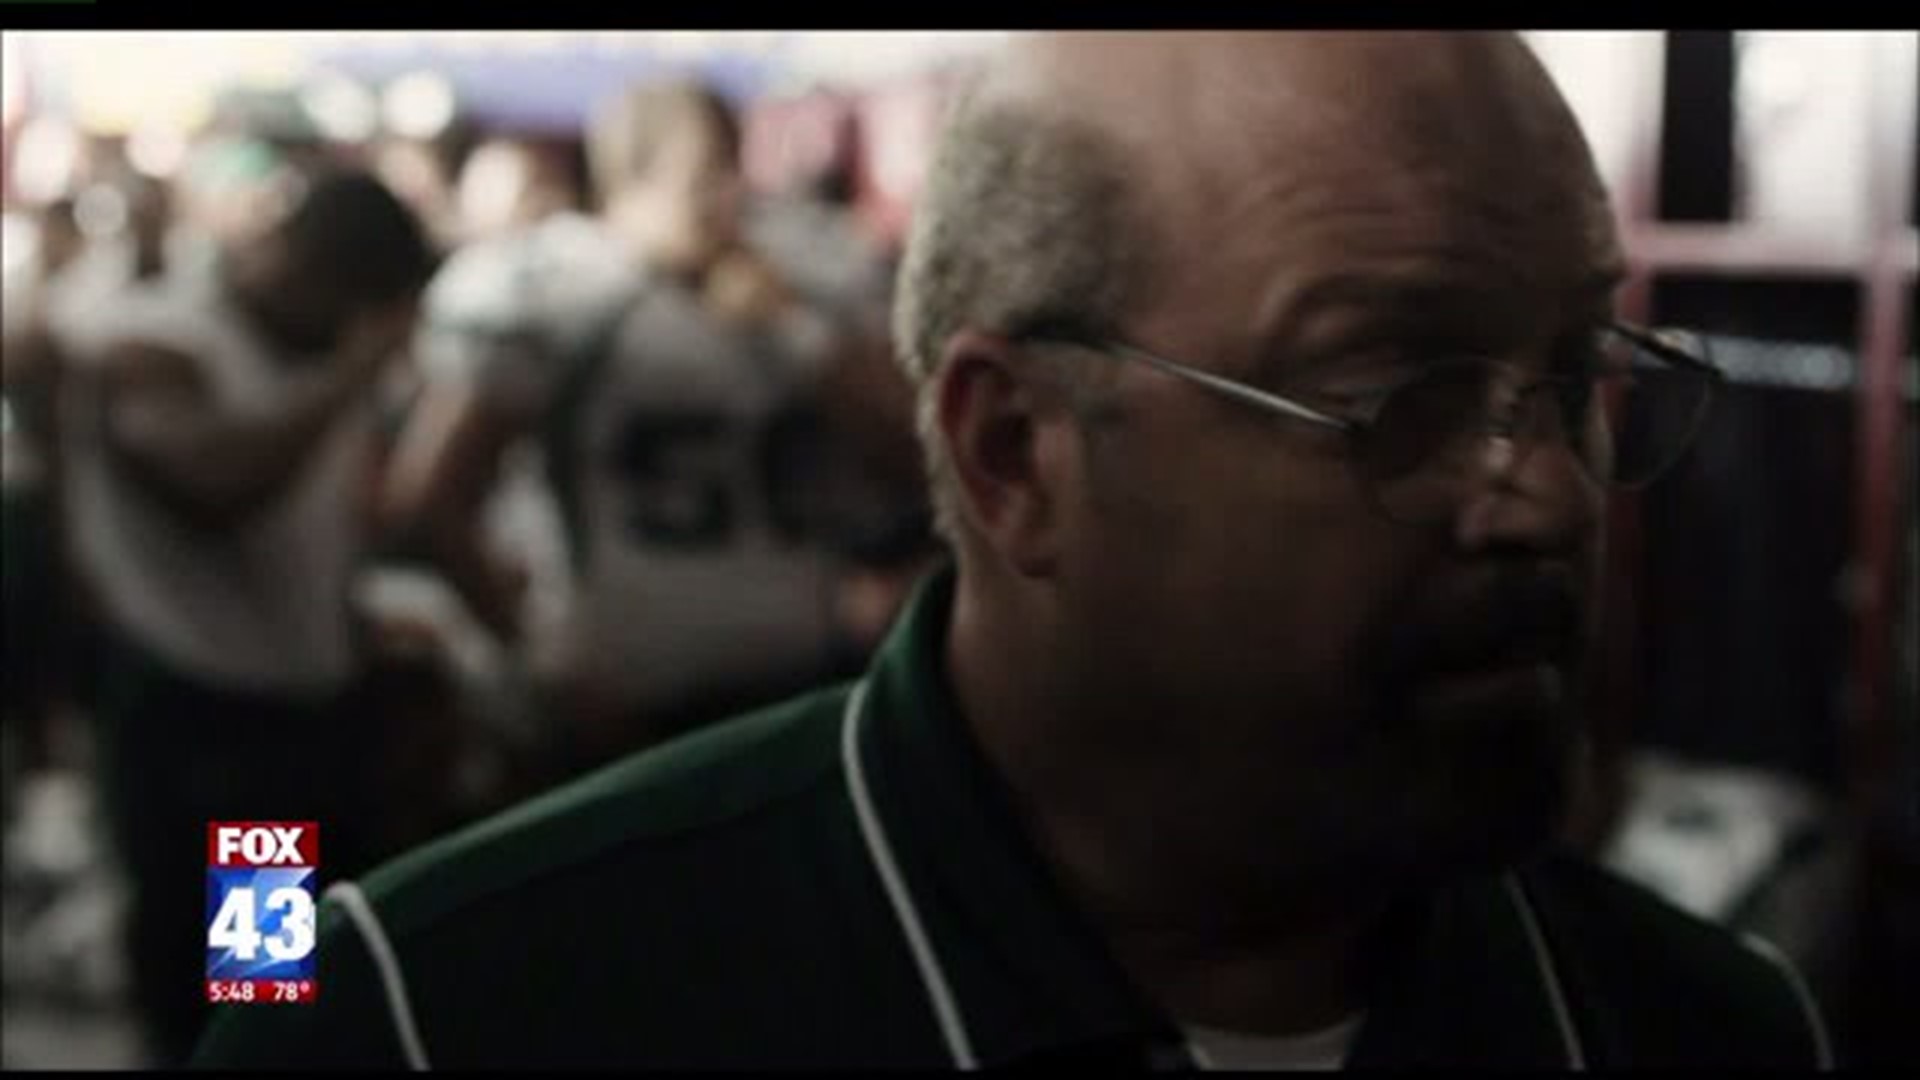 Steve at the Movies: "When The Game Stands Tall"